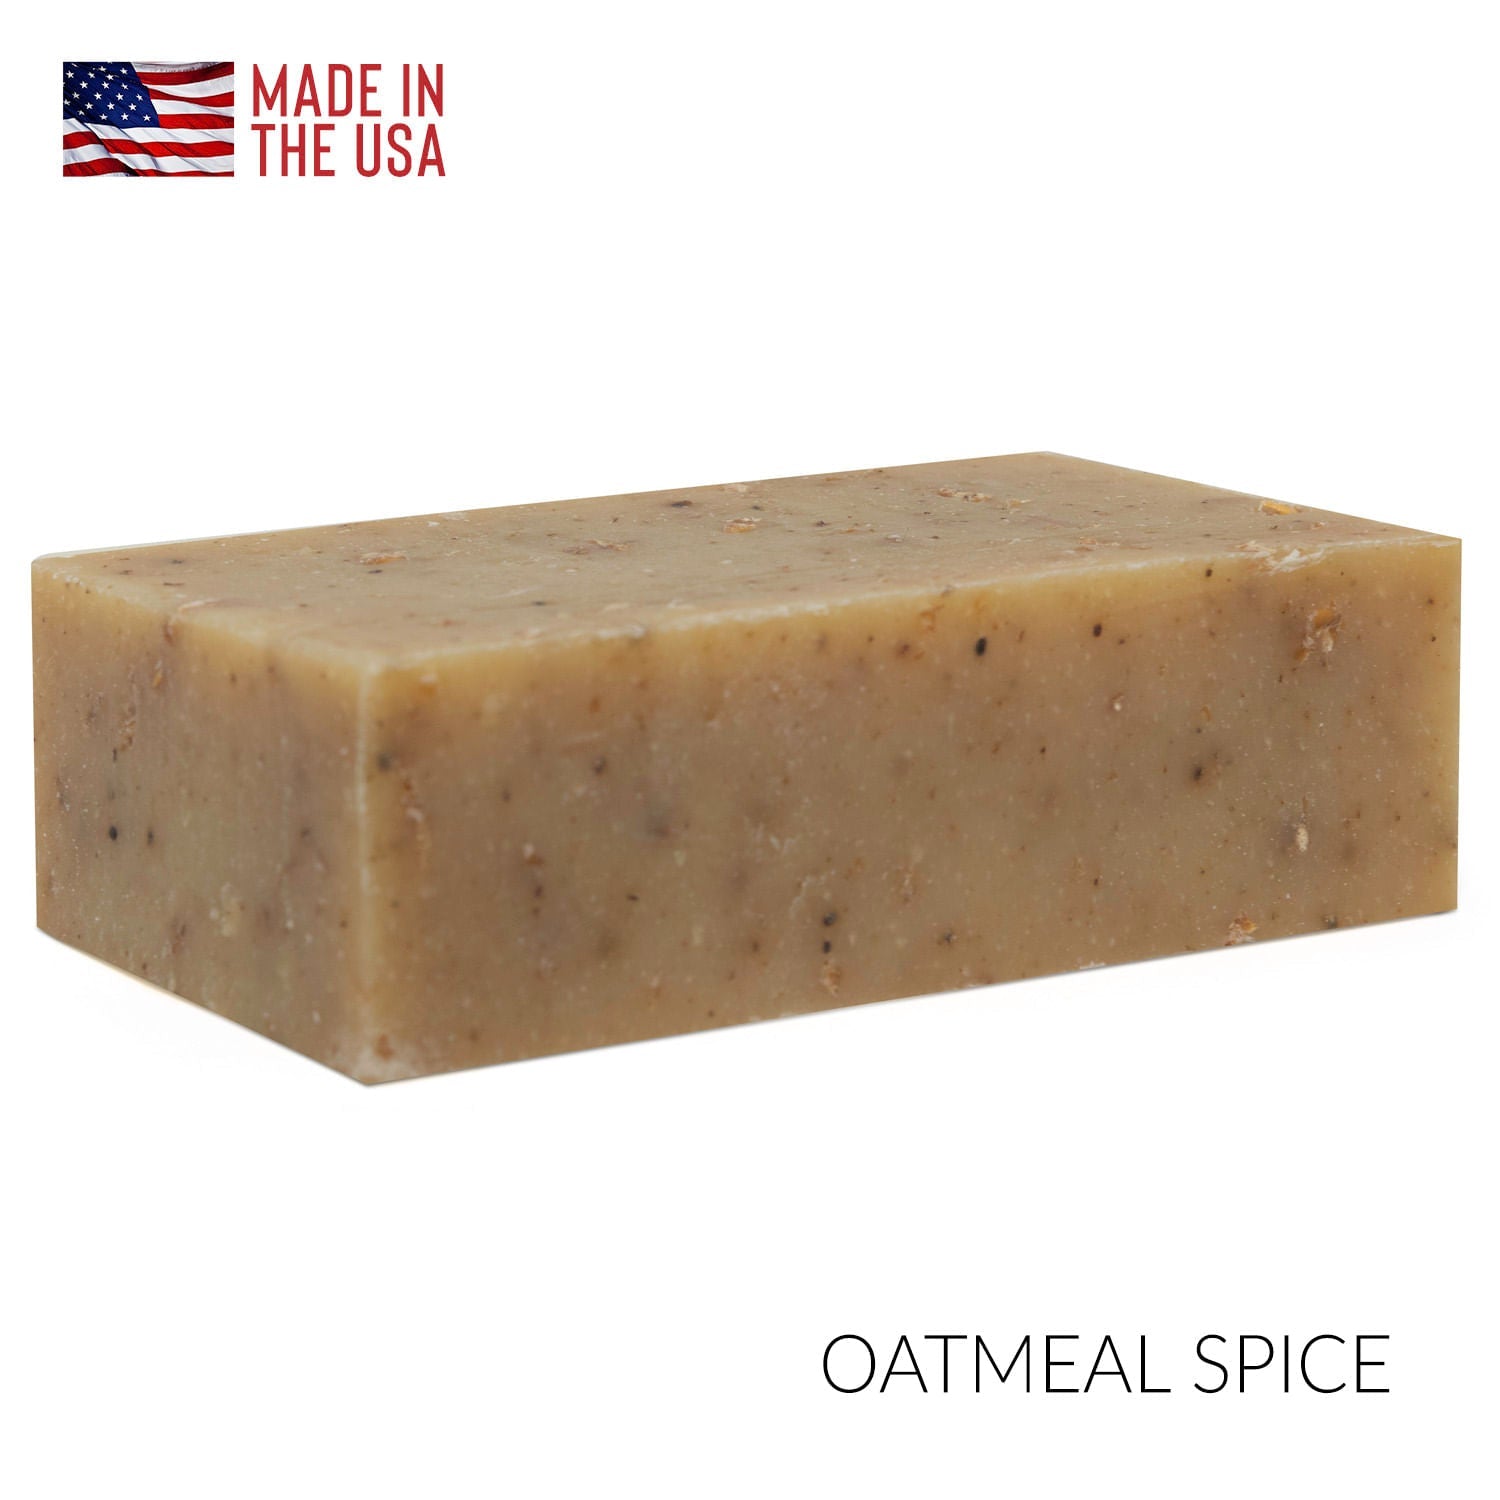 Red Oxx Organic Bar Soap